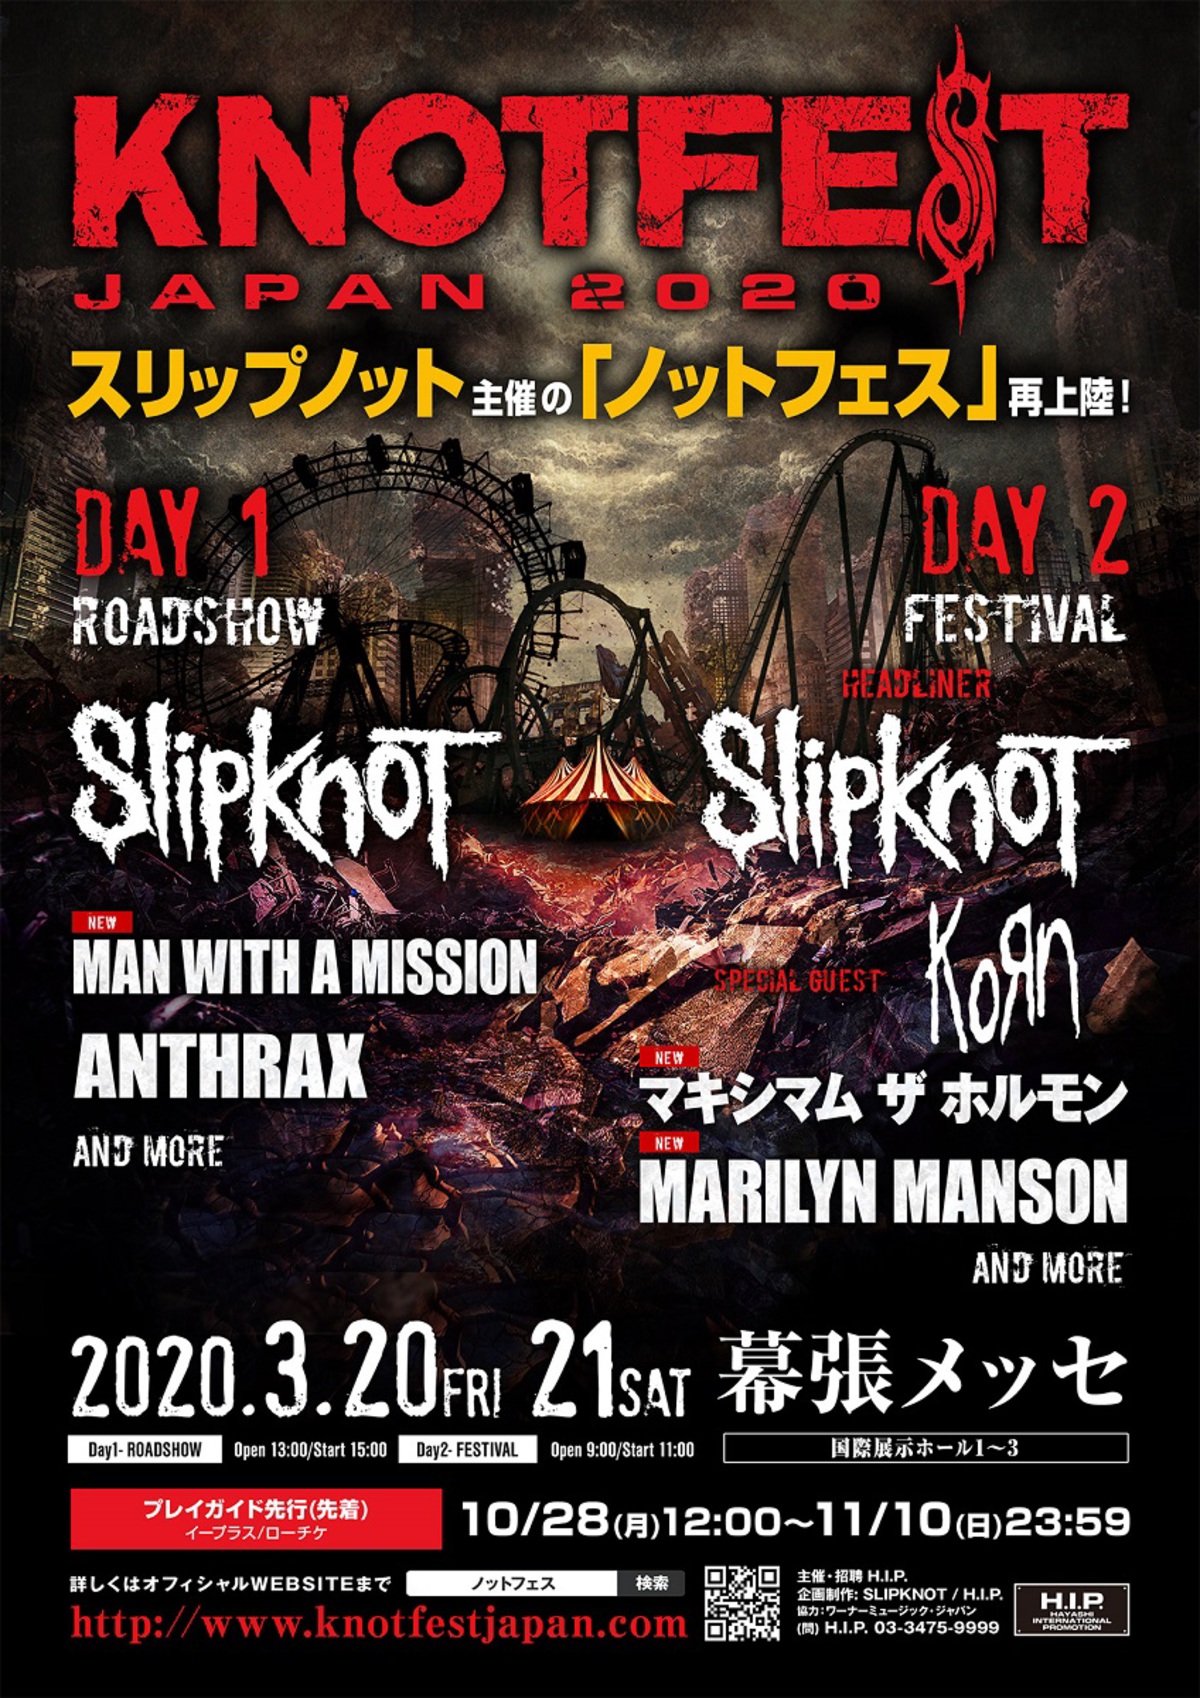 knotfest DAY2 FESTIVAL - 海外アーティスト